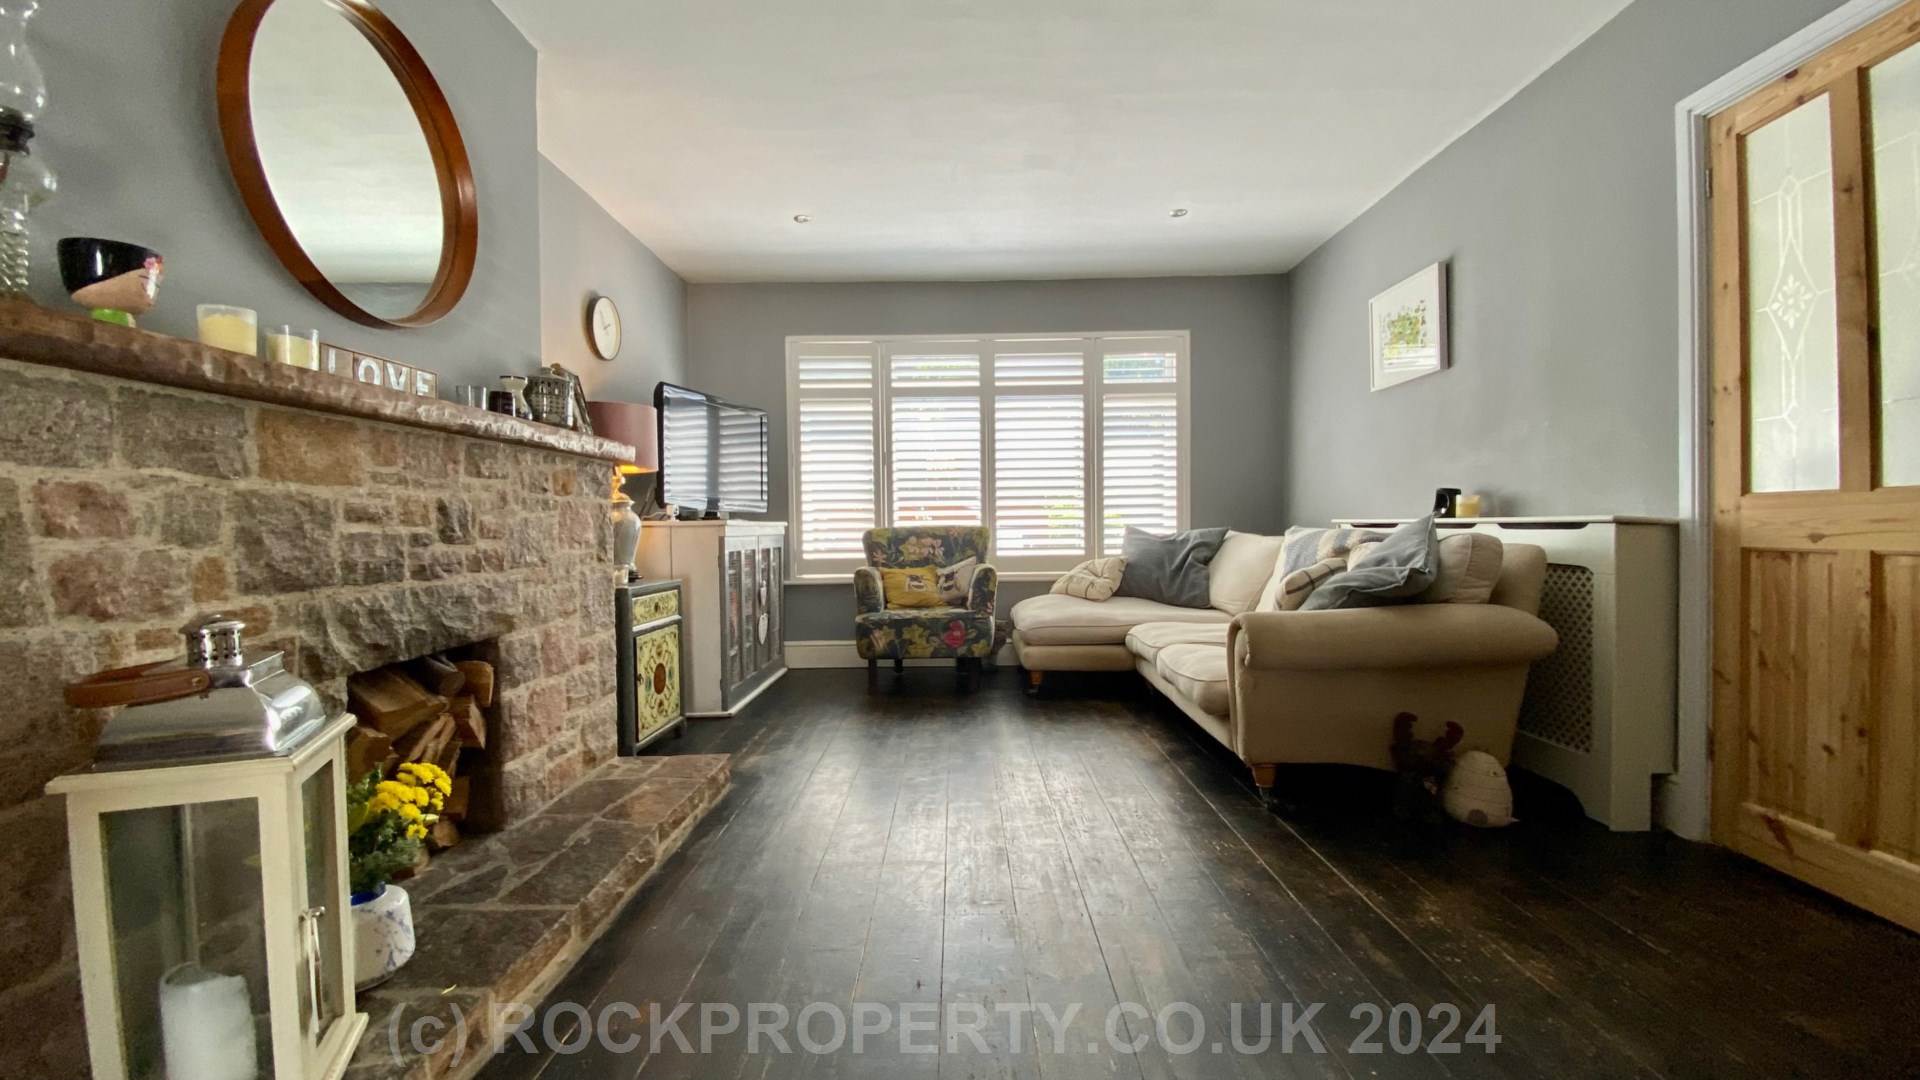 MODERN 3 BED FAMILY HOME, Langley Park, St Saviour, Image 5